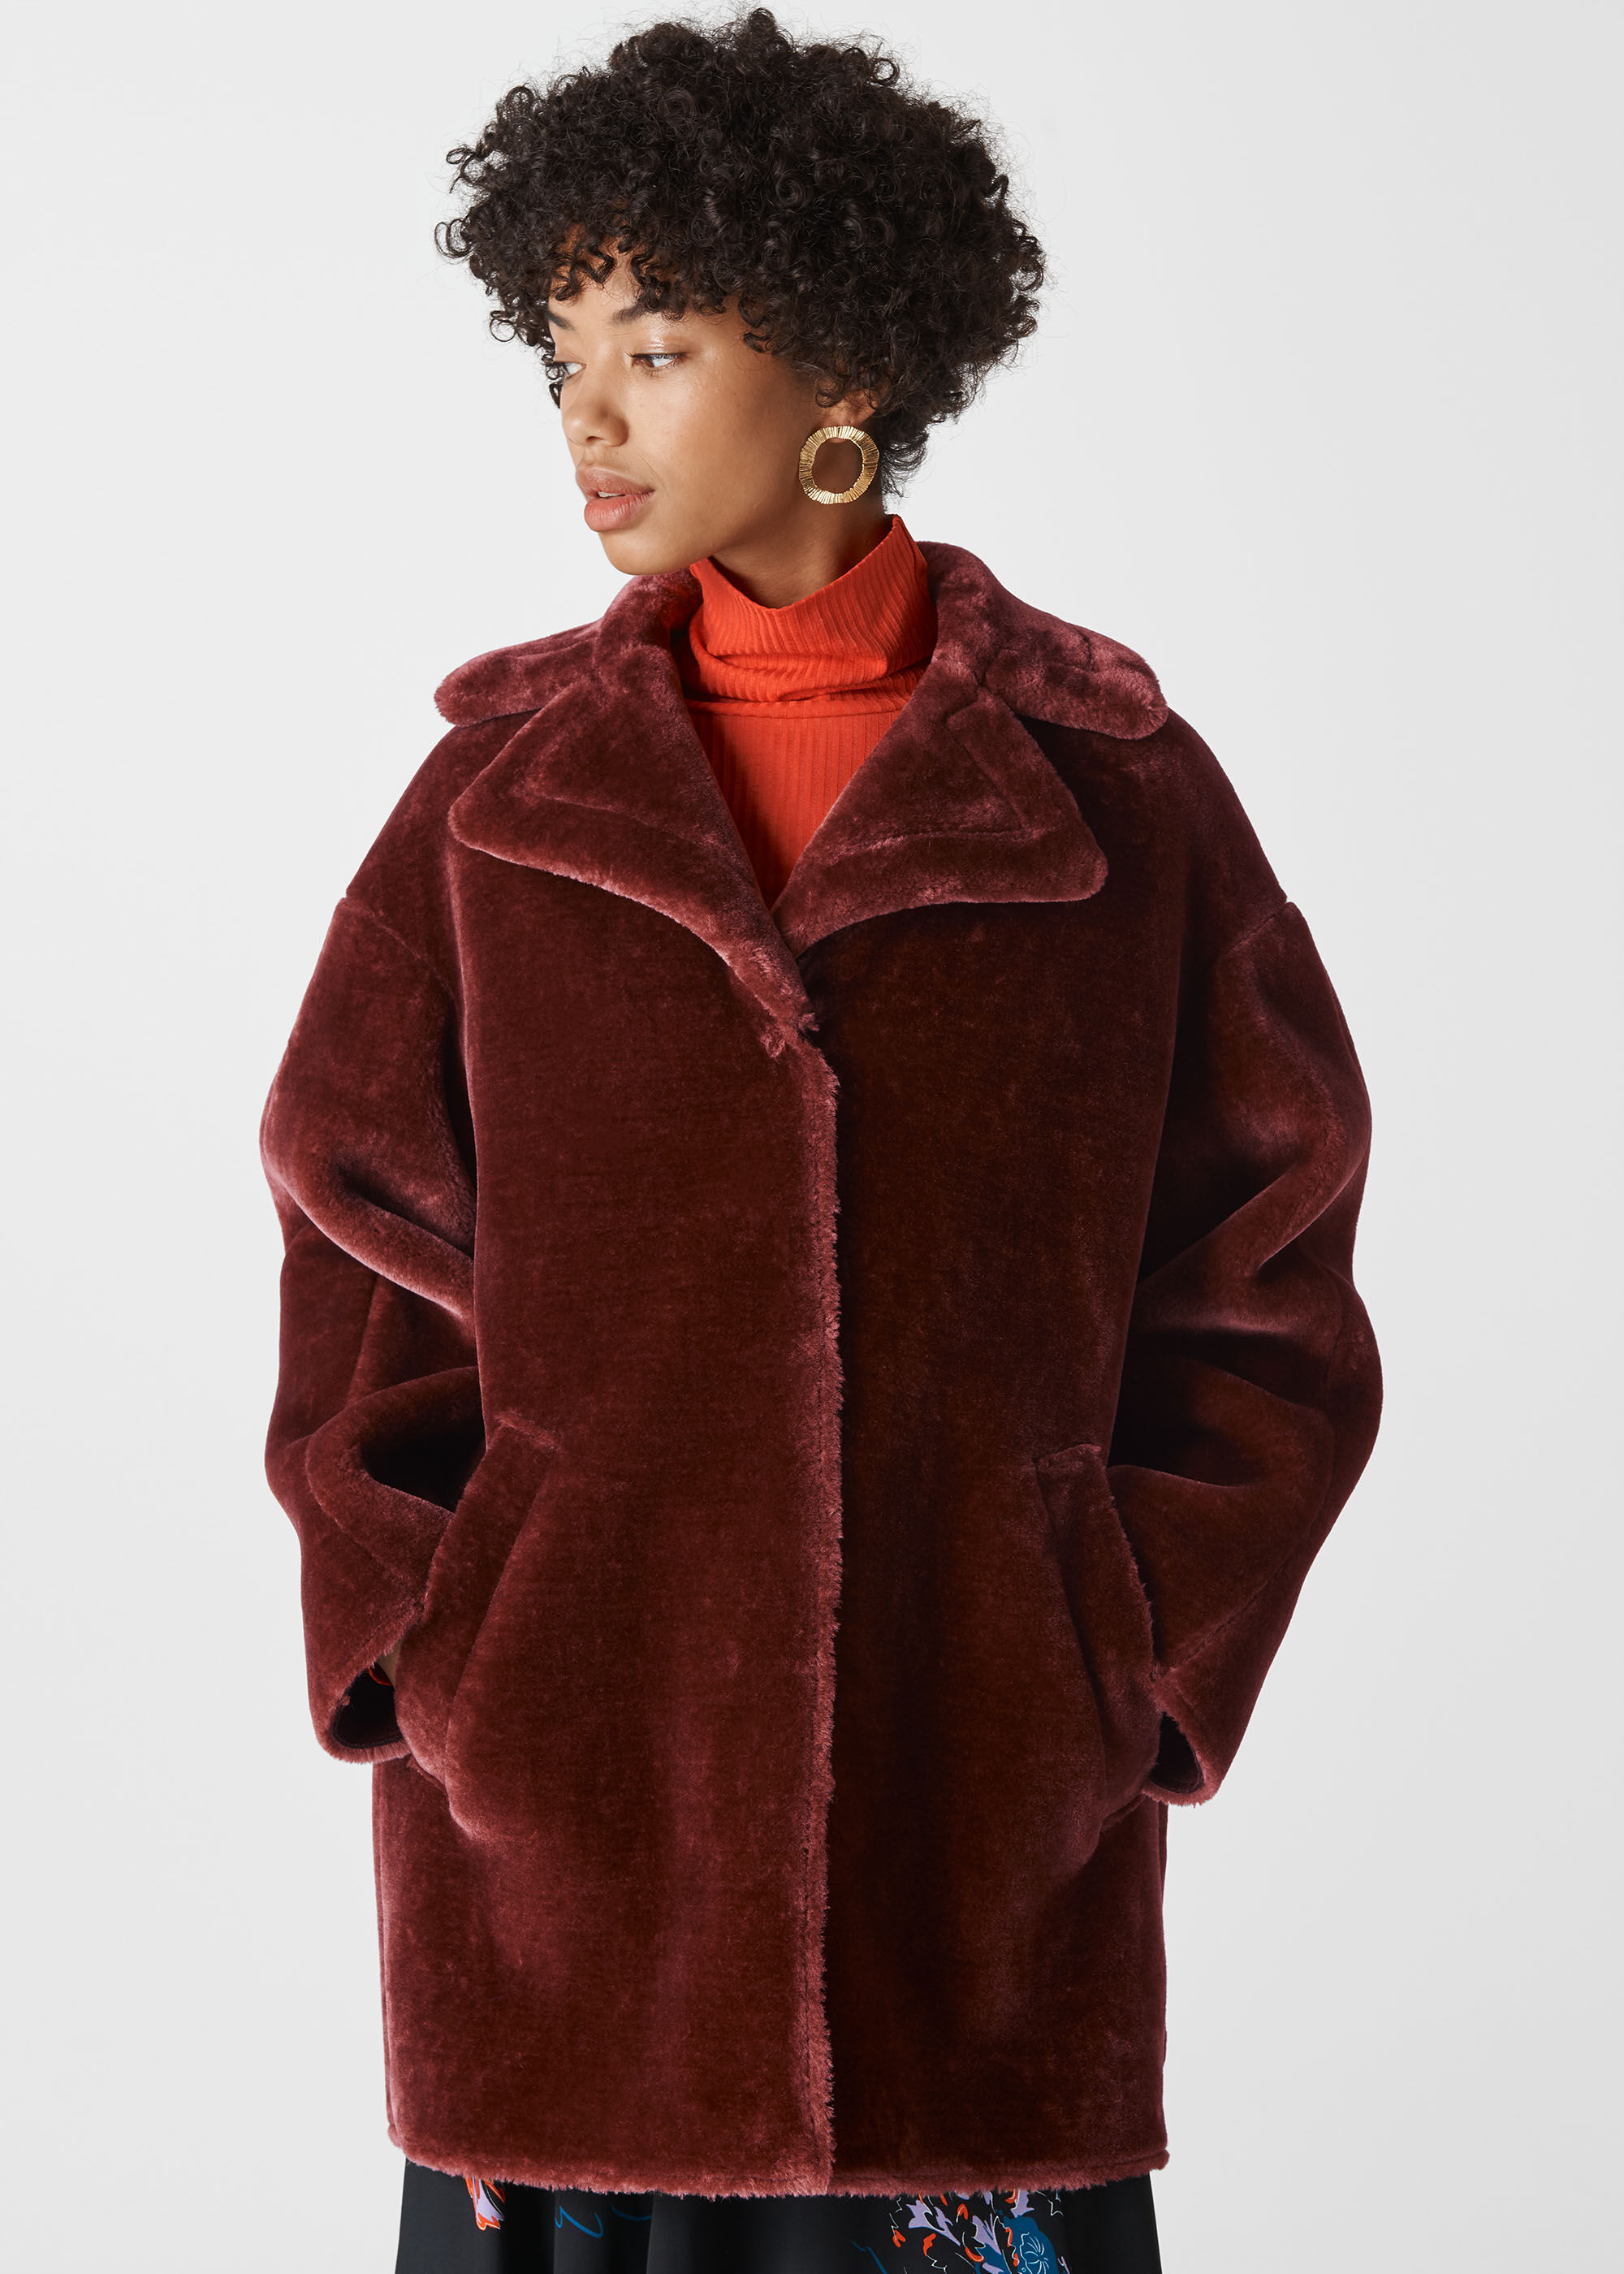 Brown Faux Fur Cocoon Coat | WHISTLES |